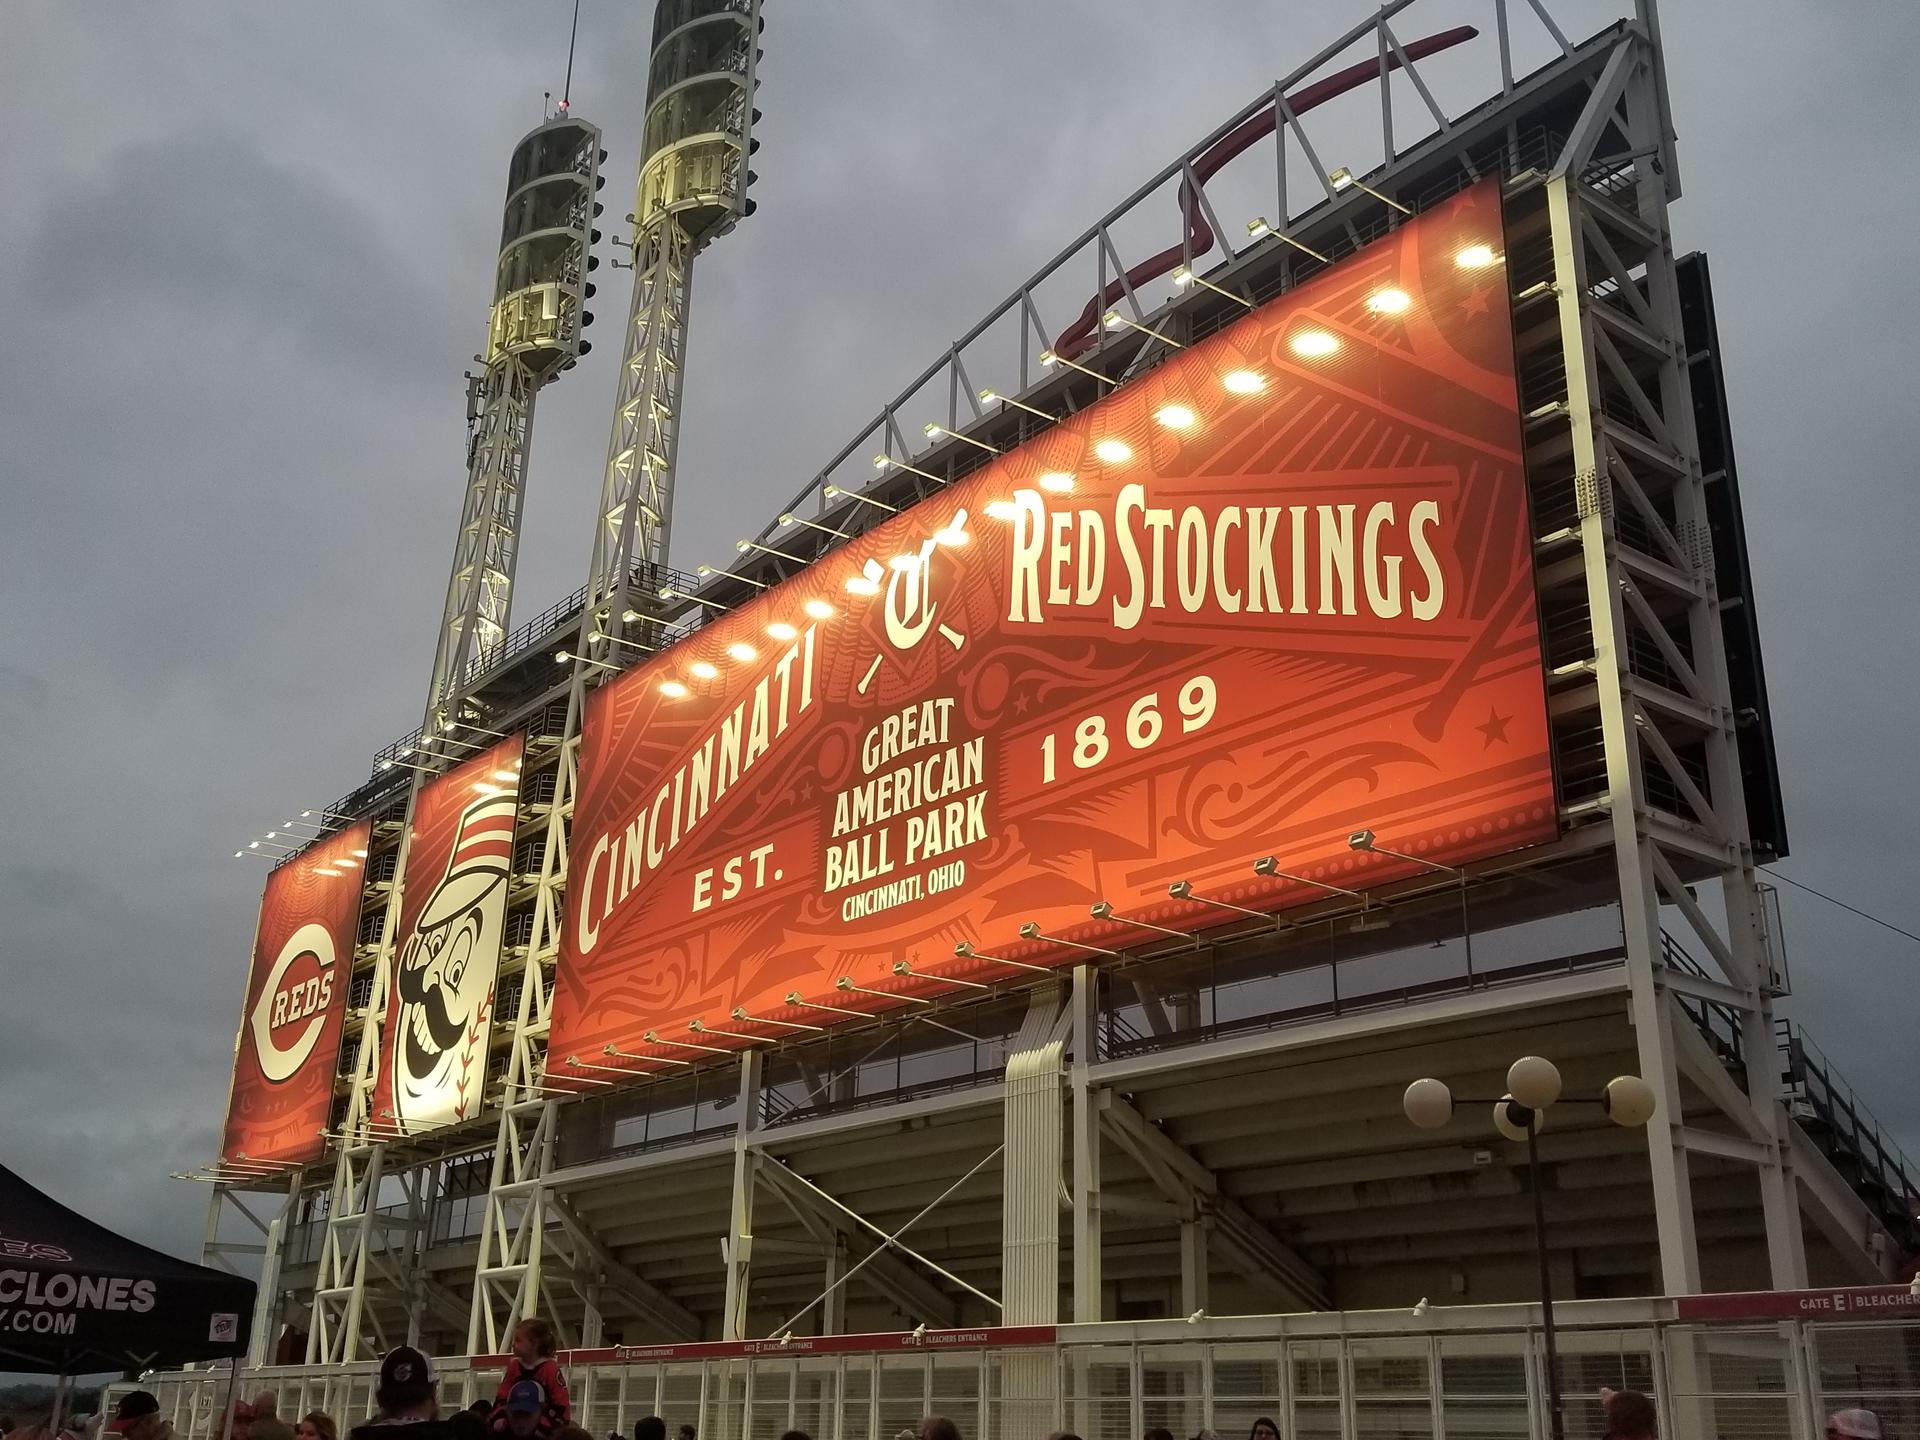 Cincinnati Reds - Back in action tomorrow in the City Connect